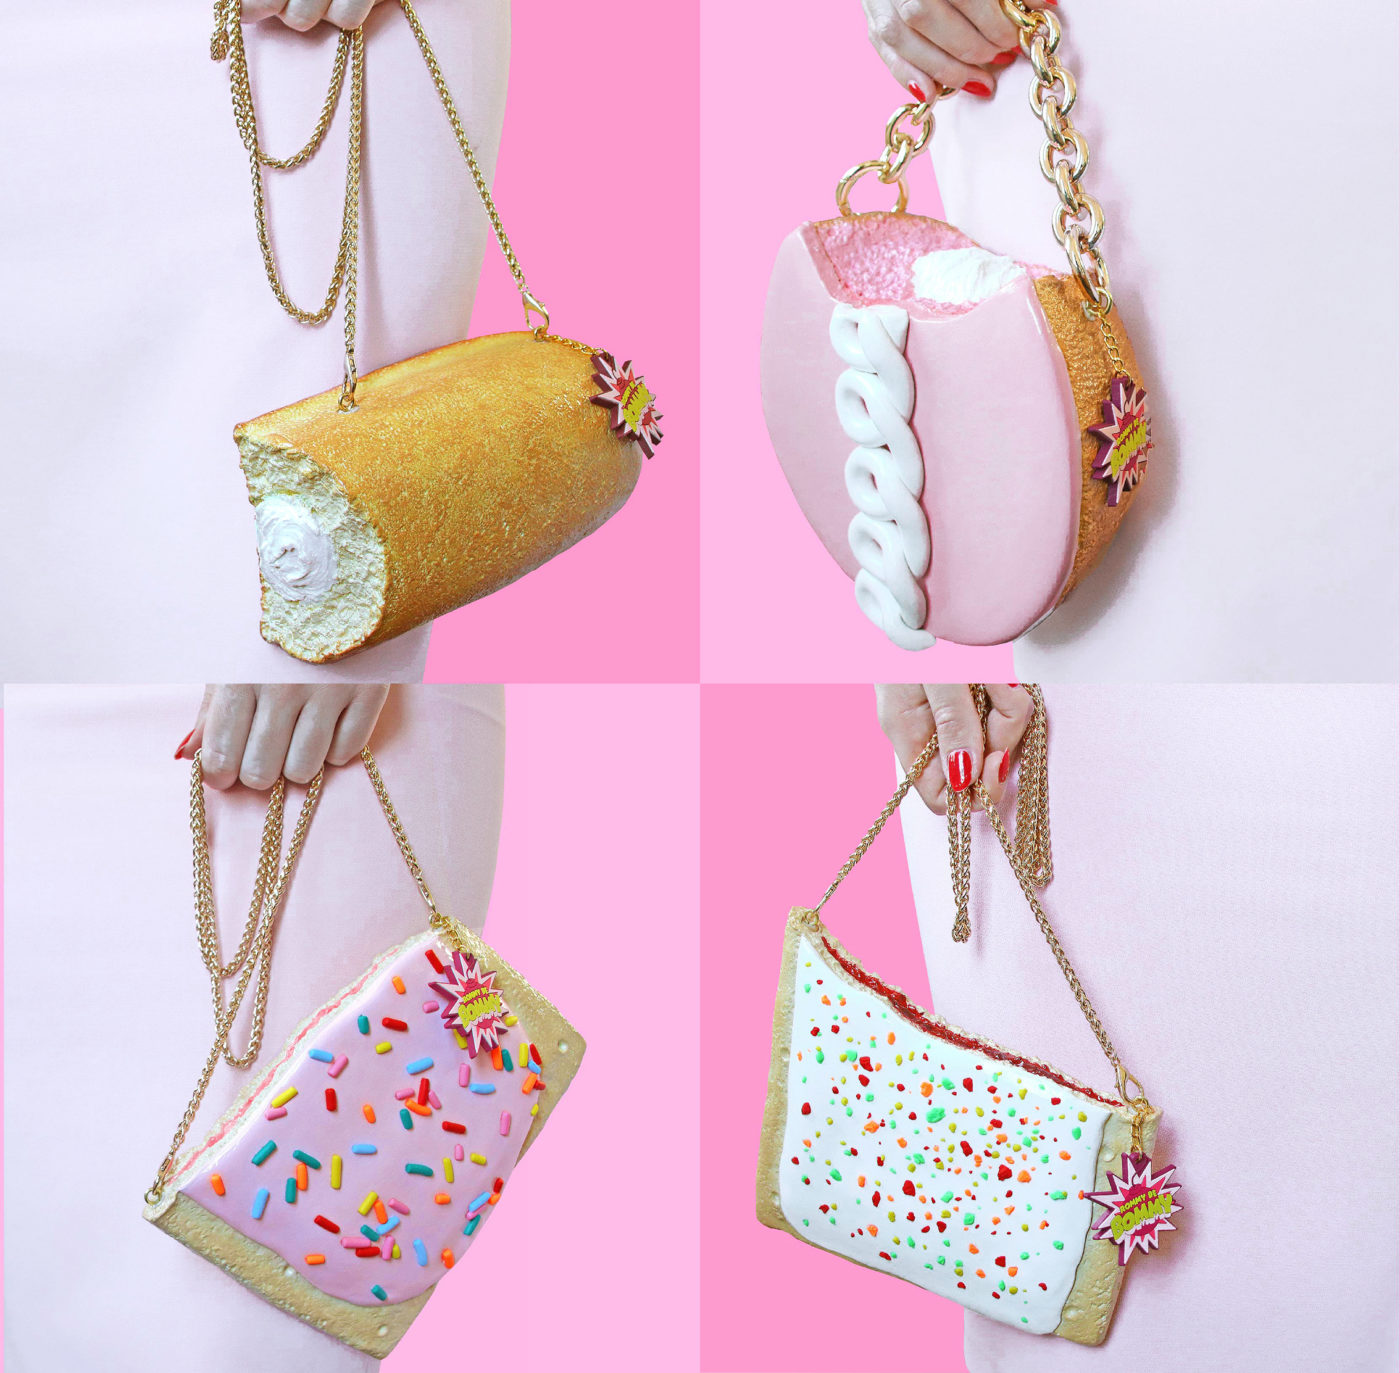 http://sosuperawesome.com/post/167394198014/new-food-purses-by-rommy-de- bommy-on-etsy | Fun bags, Novelty purses, Handmade